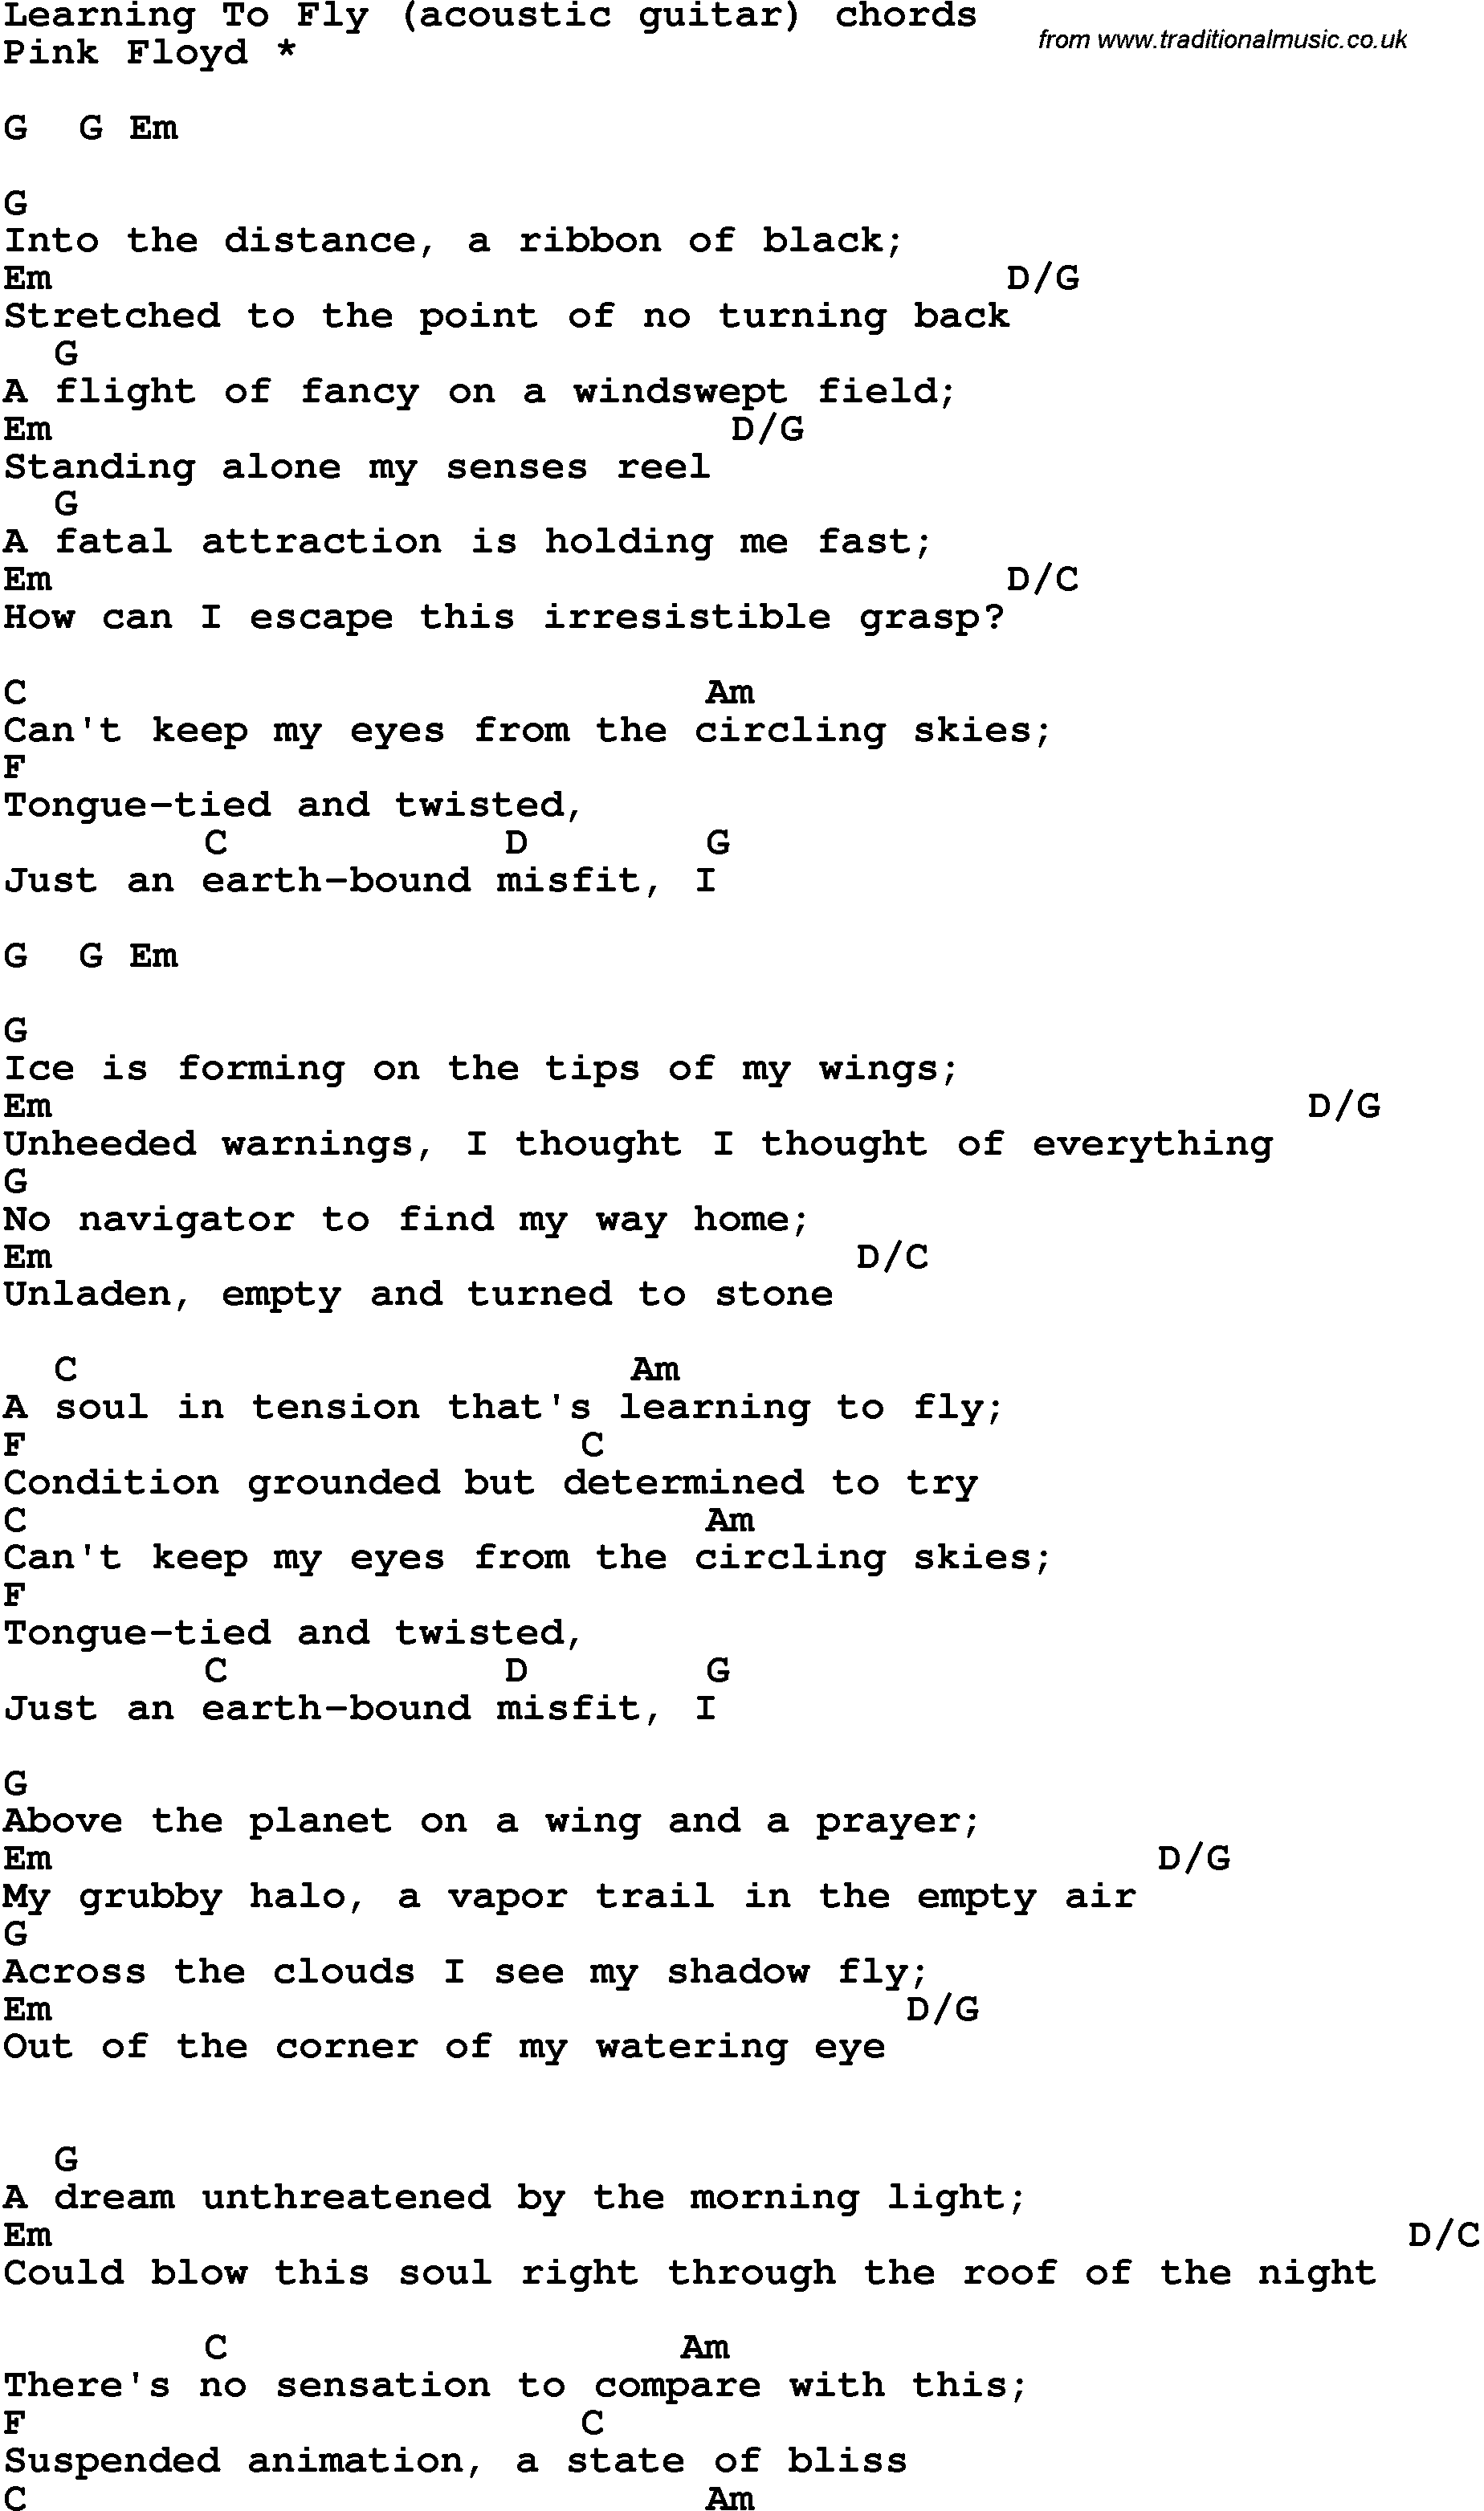 Song Lyrics with guitar chords for Learning To Fly - Pink Floyd